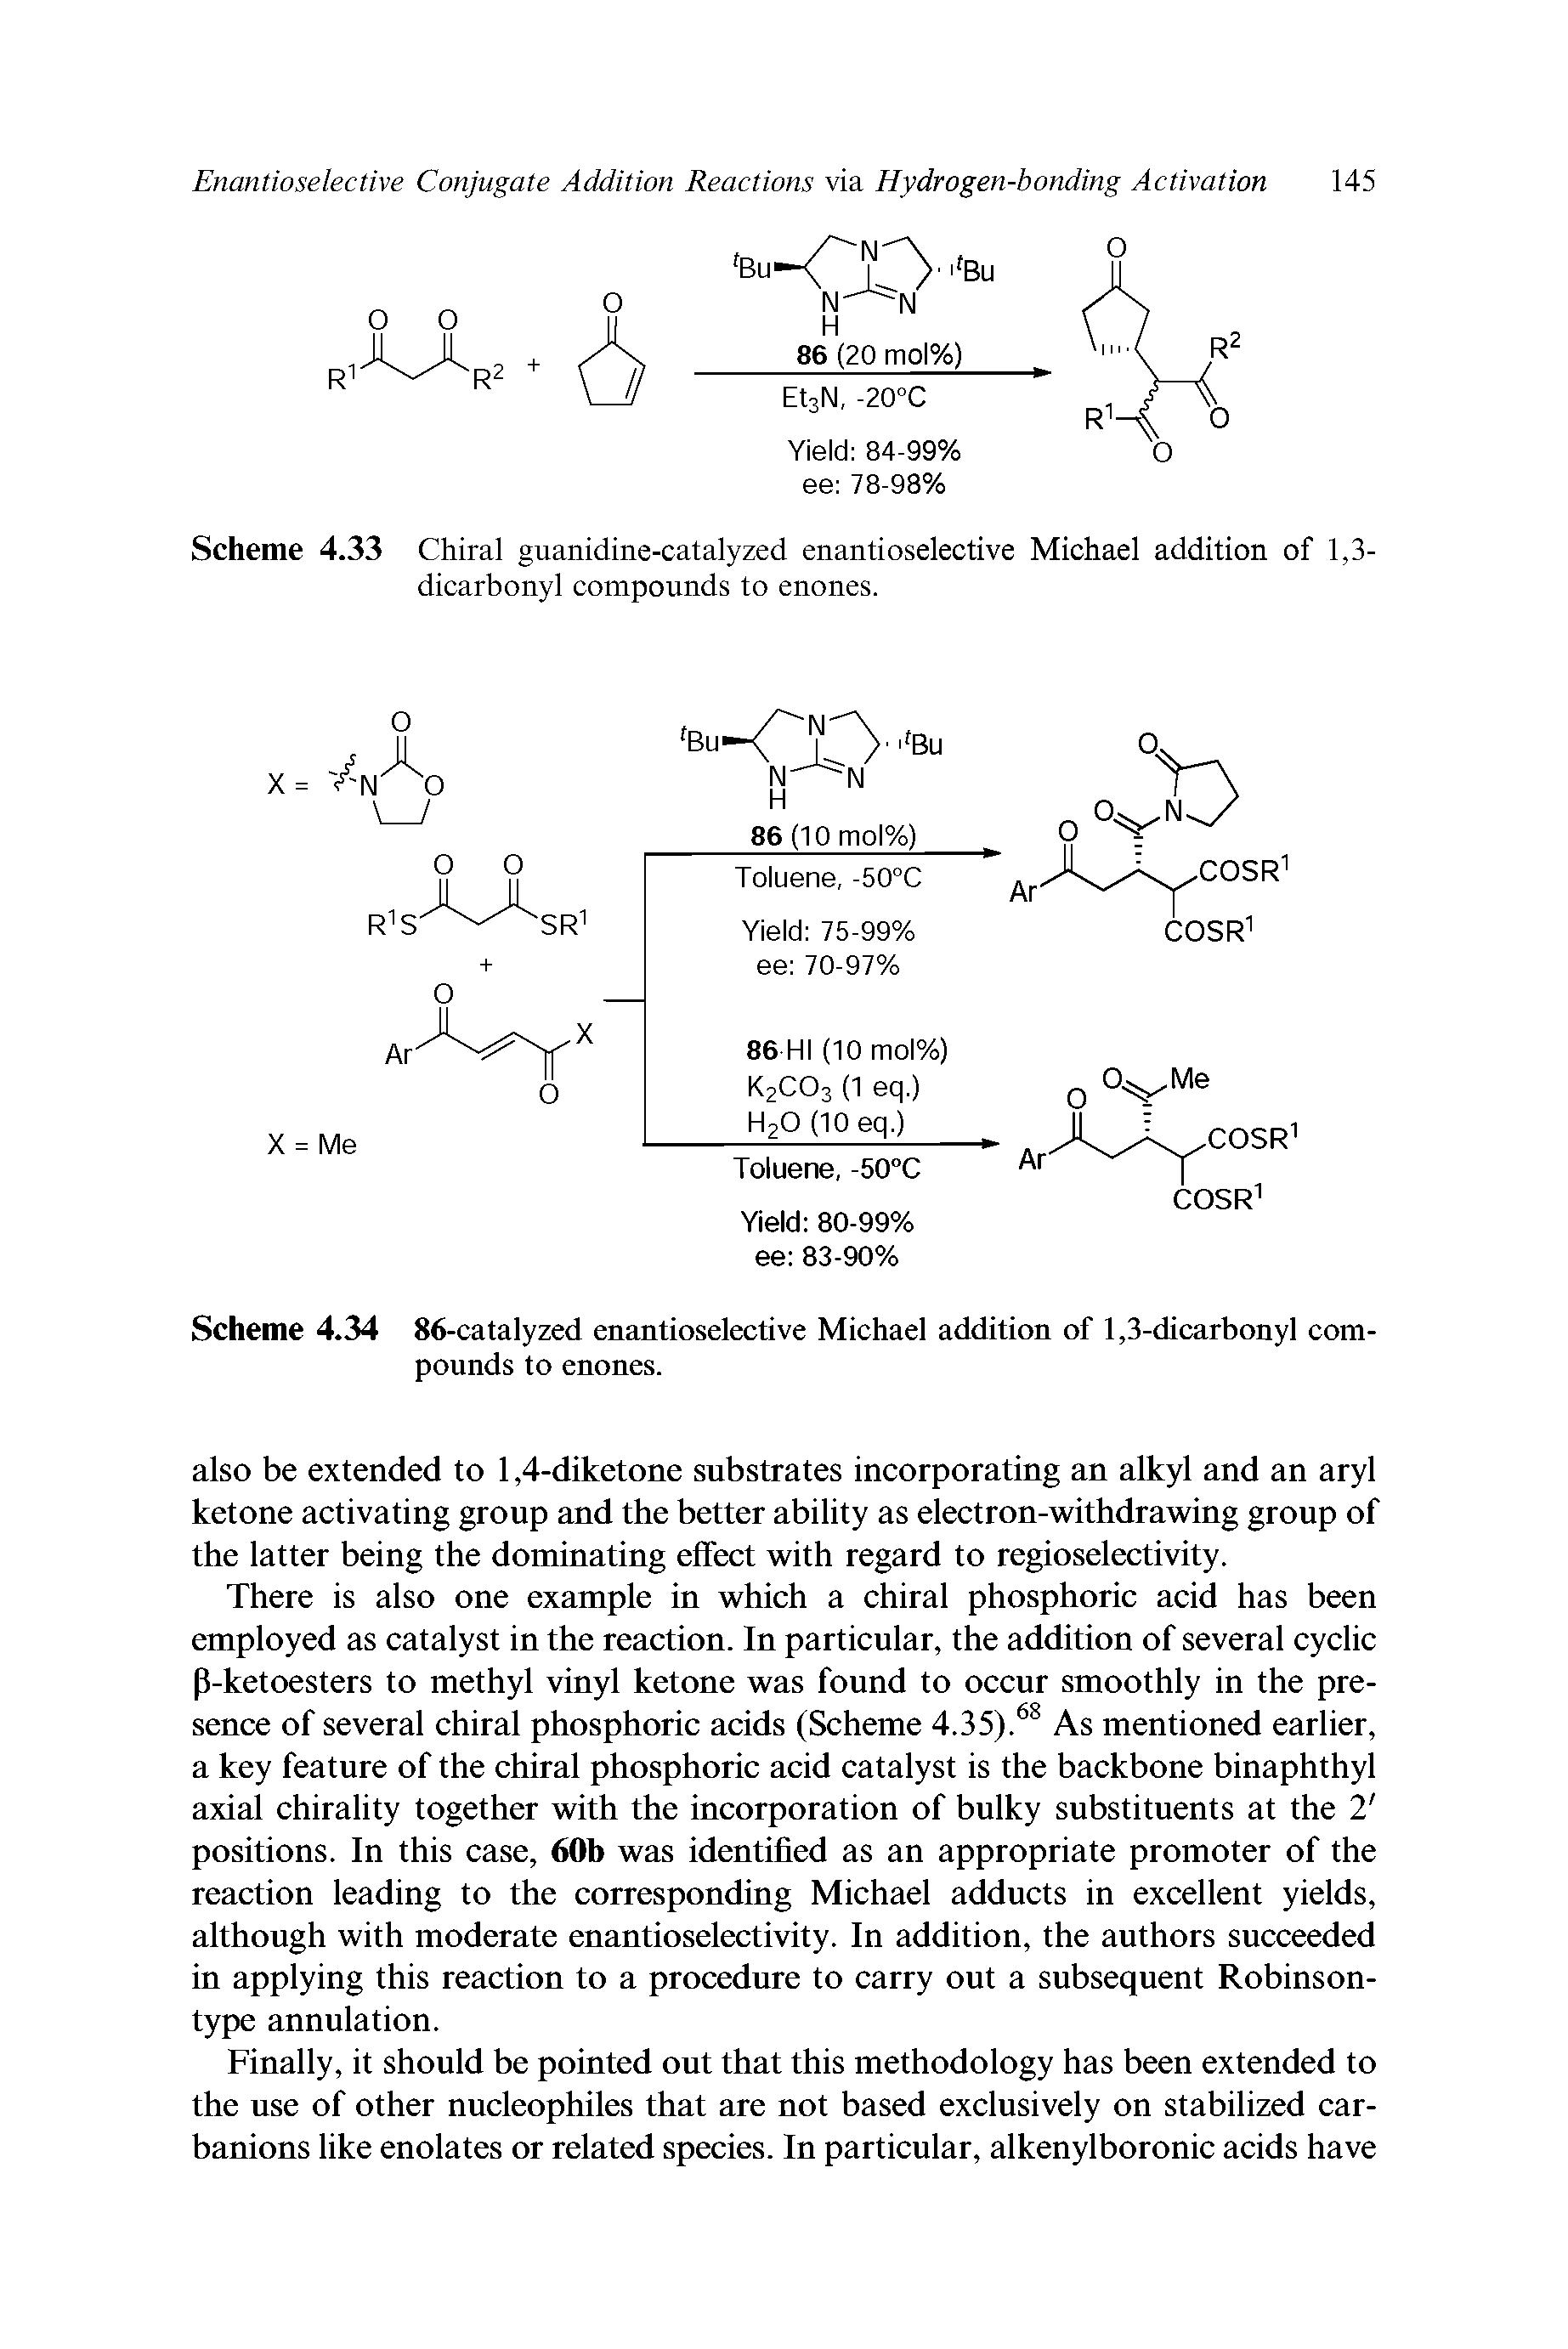 Scheme 4.33 Chiral guanidine-catalyzed enantioselective Michael addition of 1,3-dicarbonyl compounds to enones.